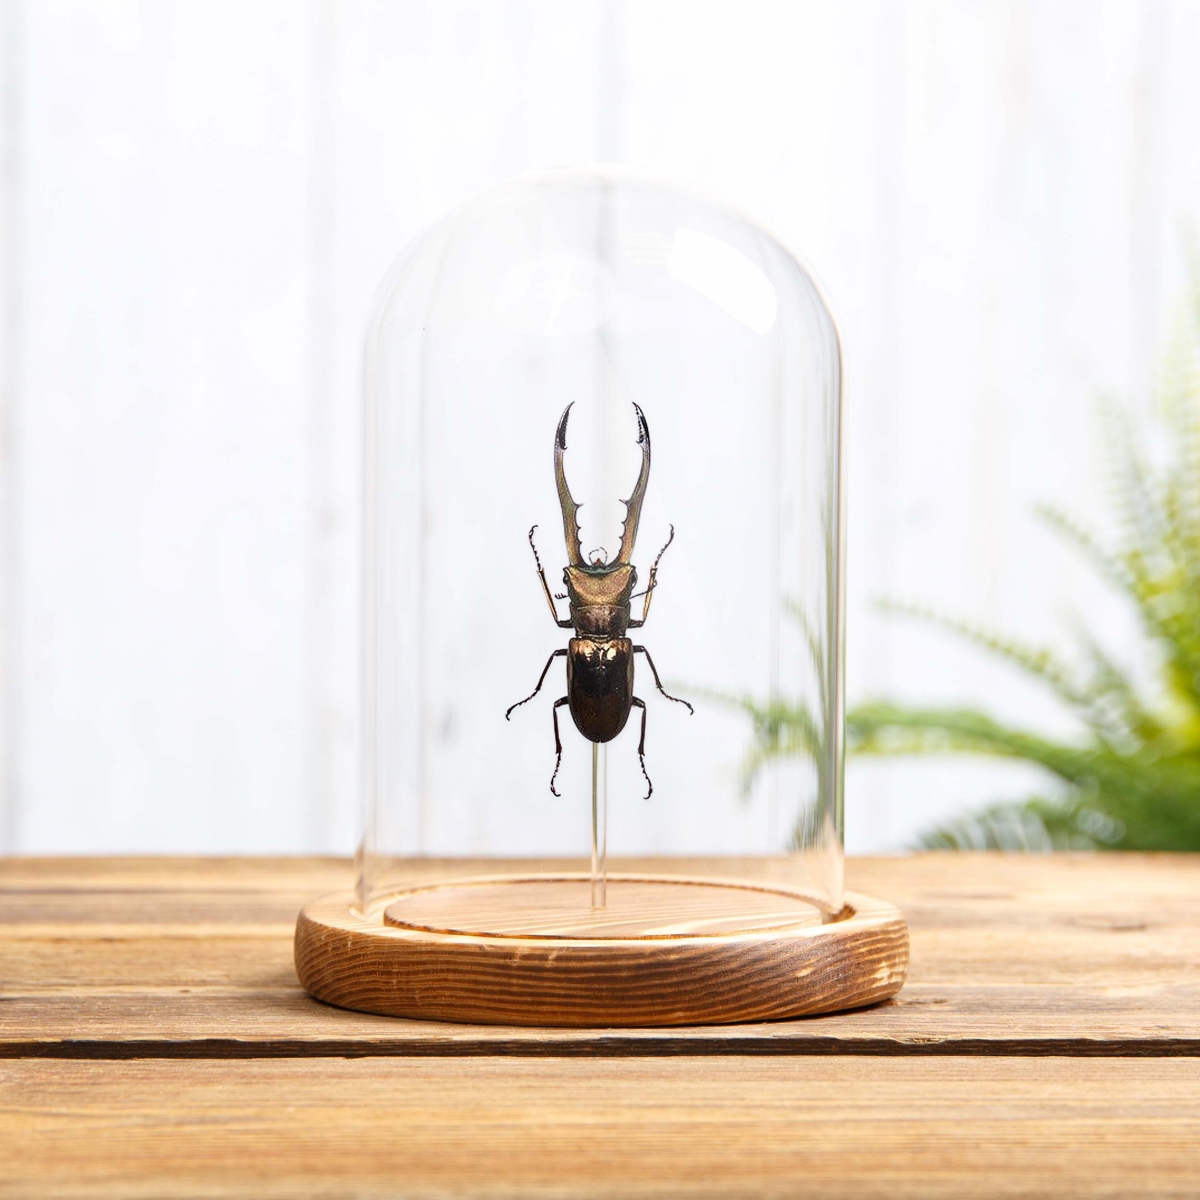 Stag Beetle in Glass Dome with Wooden Base (Cyclommatus metallifer finae)